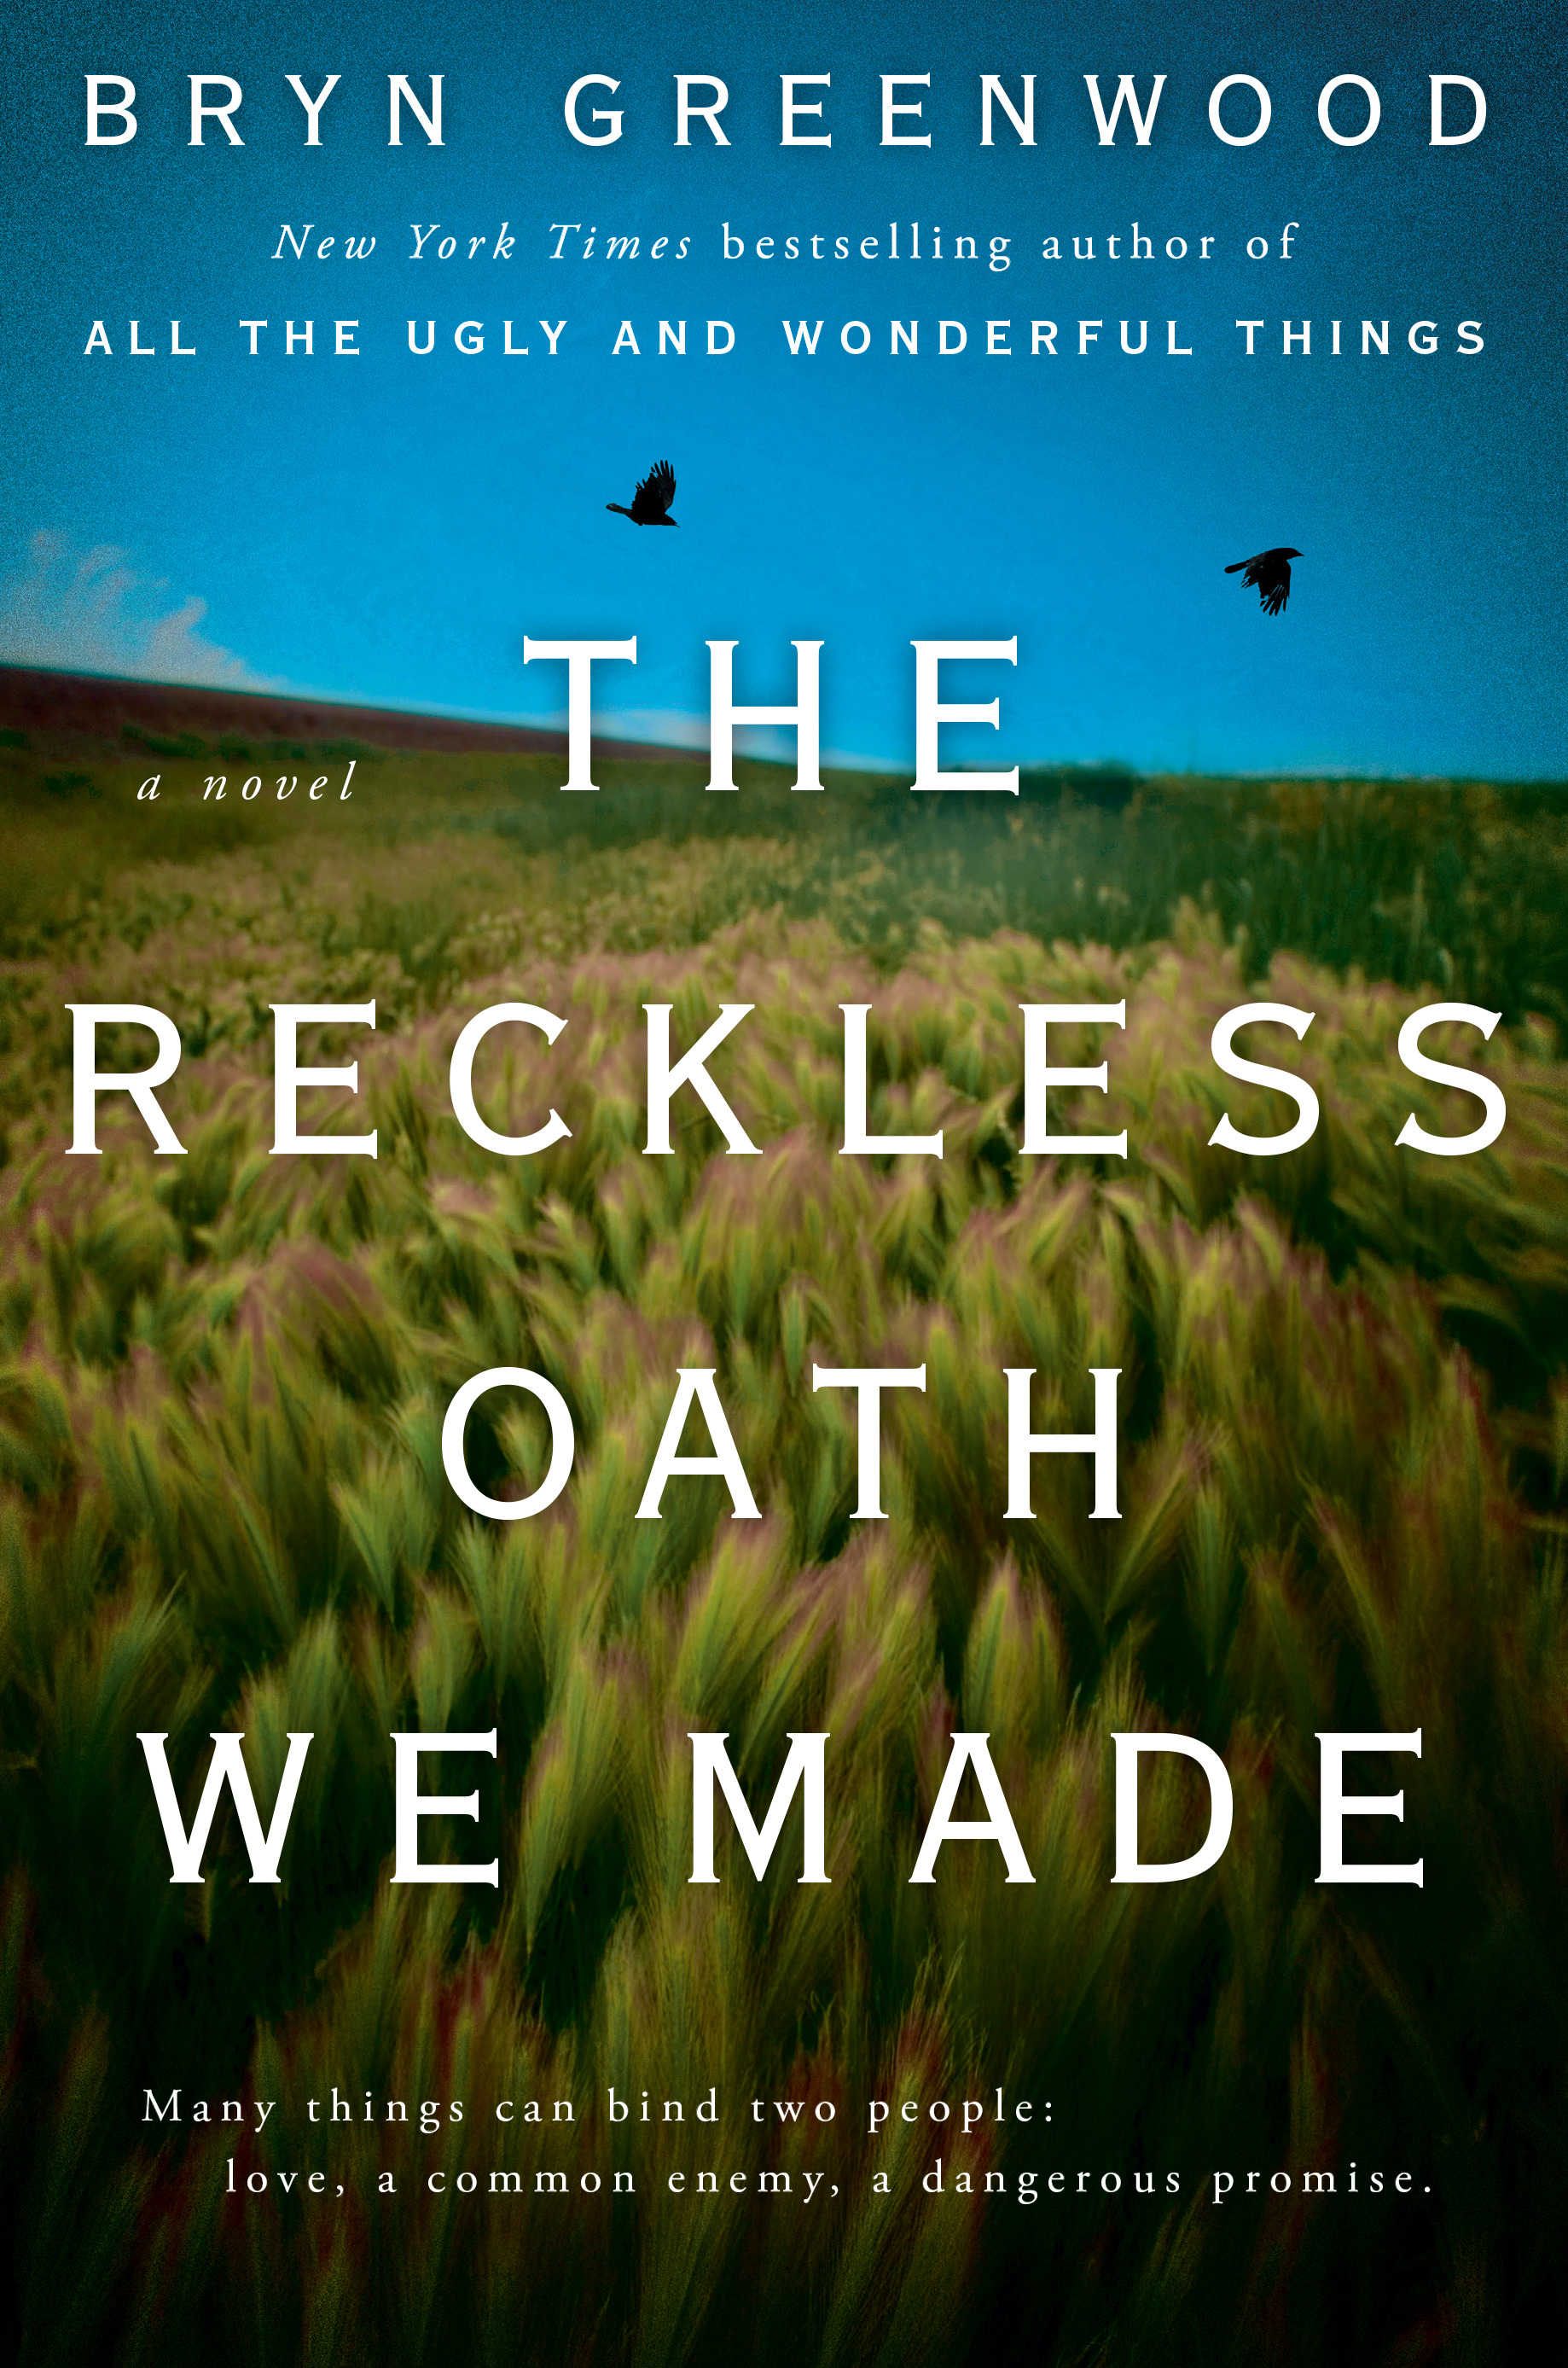 Image for "The Reckless Oath We Made"